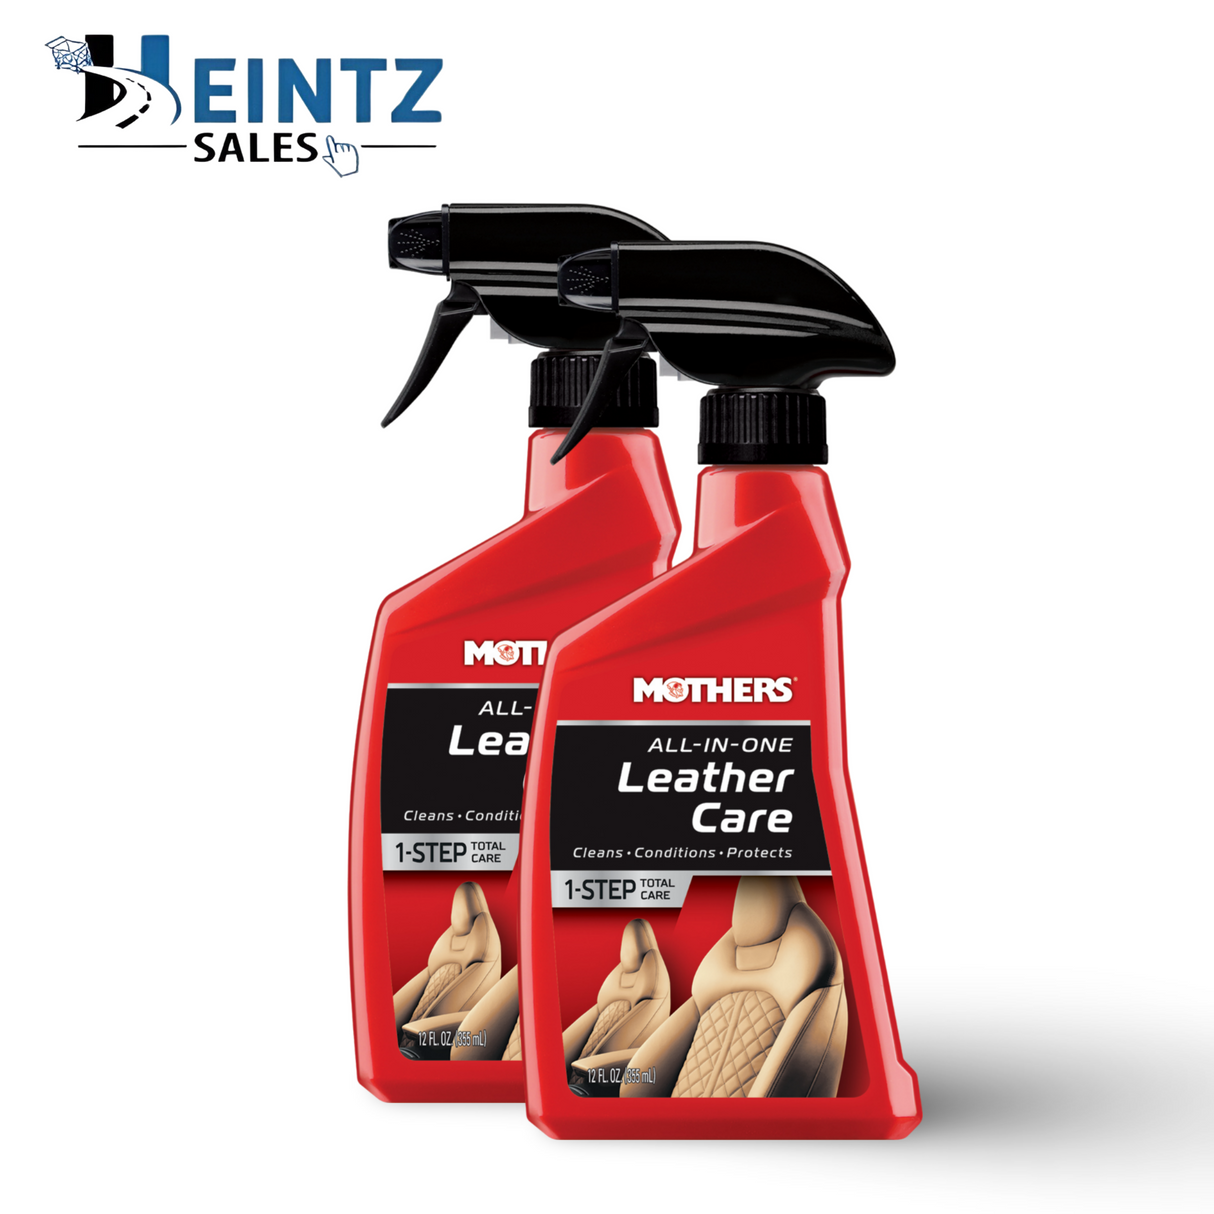 MOTHERS 06512 All-In-One Leather Care 2 PACK - Condition & Protect - Lift Dirt -12 oz.